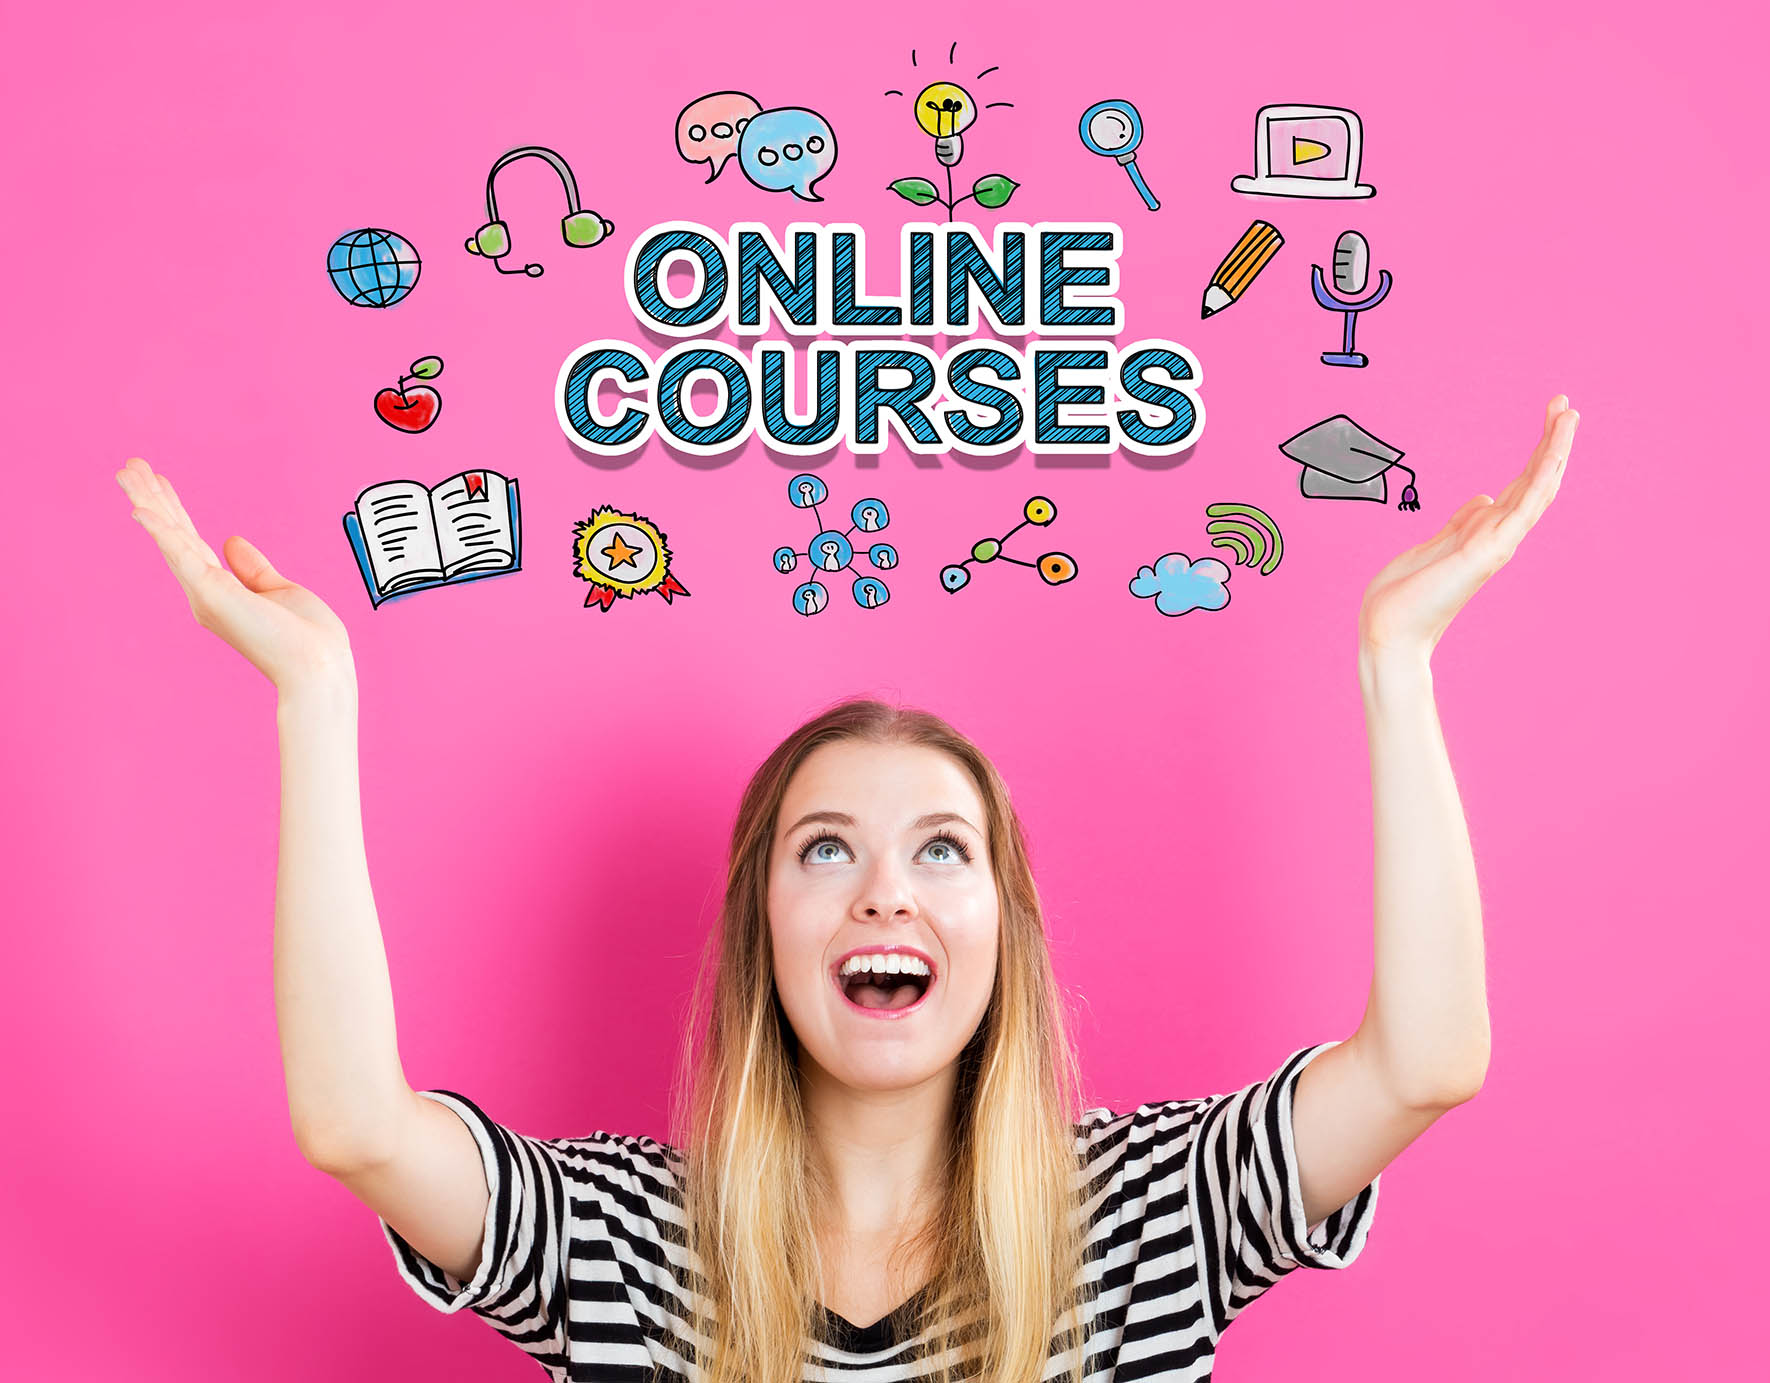 Online Courses concept with young woman reaching and looking upwards